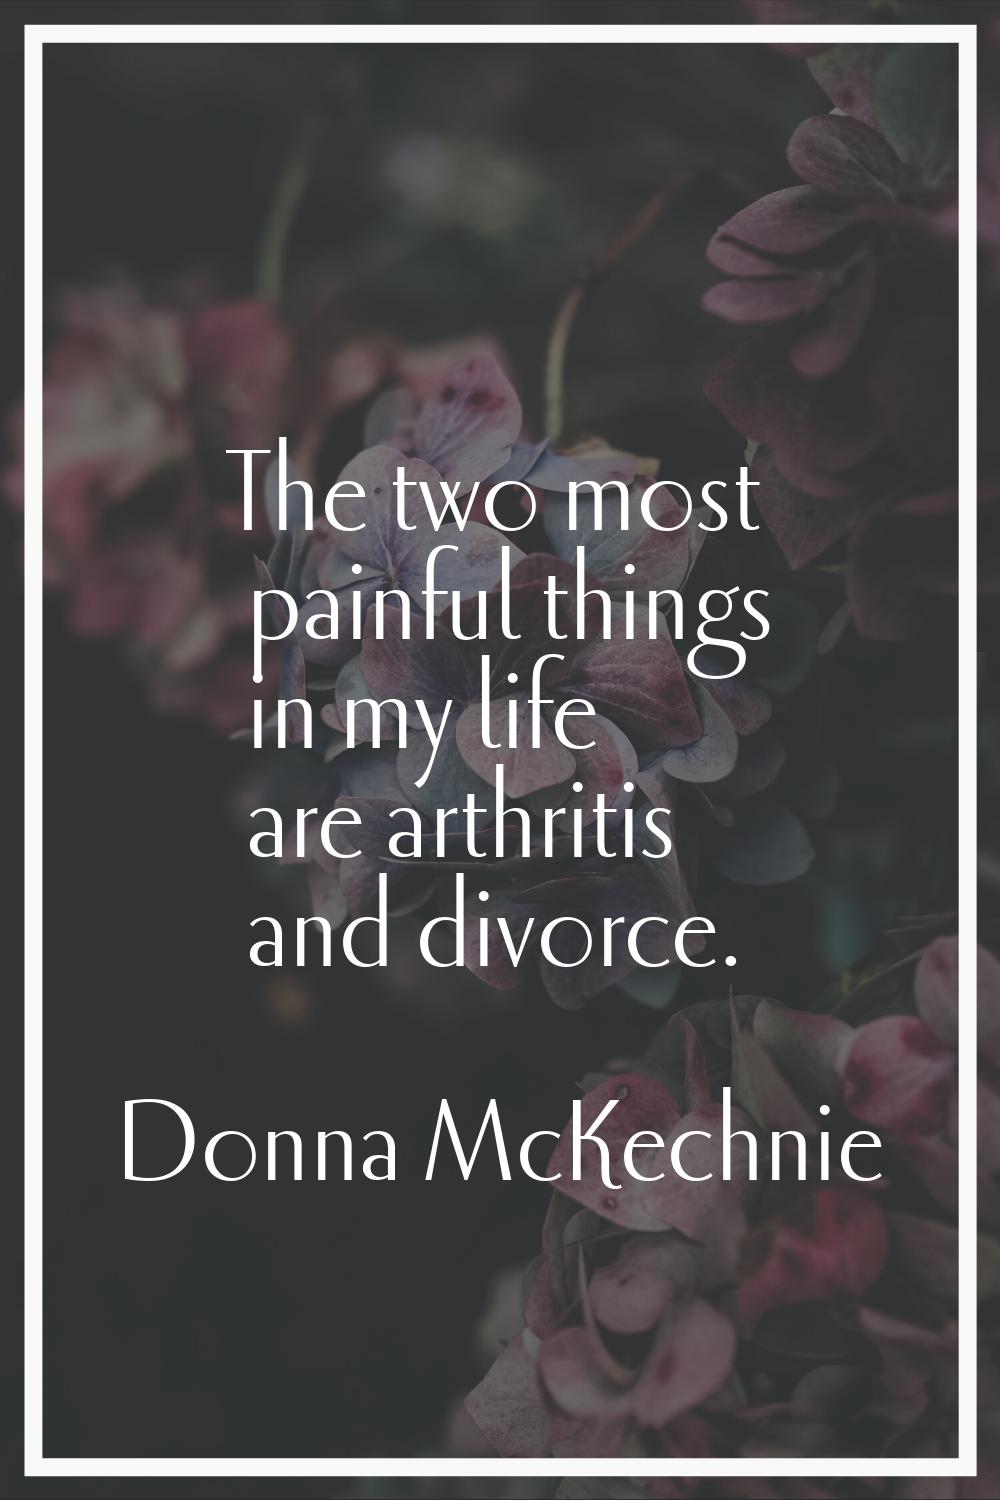 The two most painful things in my life are arthritis and divorce.